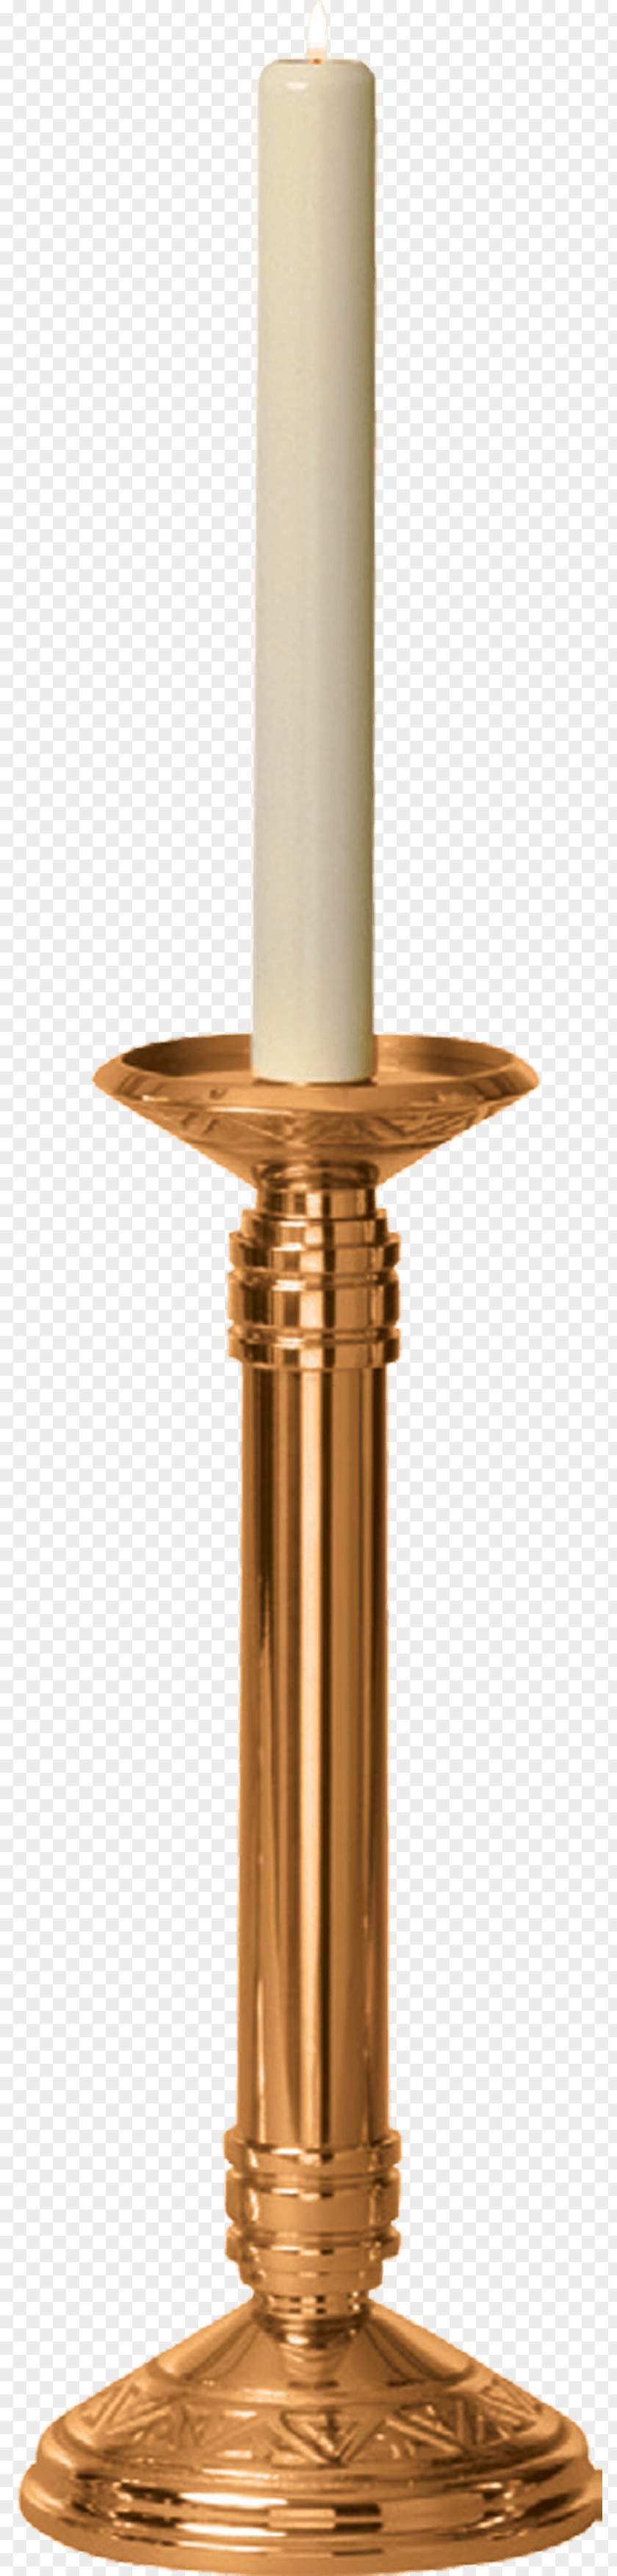 Altar Candlestick In The Catholic Church Candle PNG